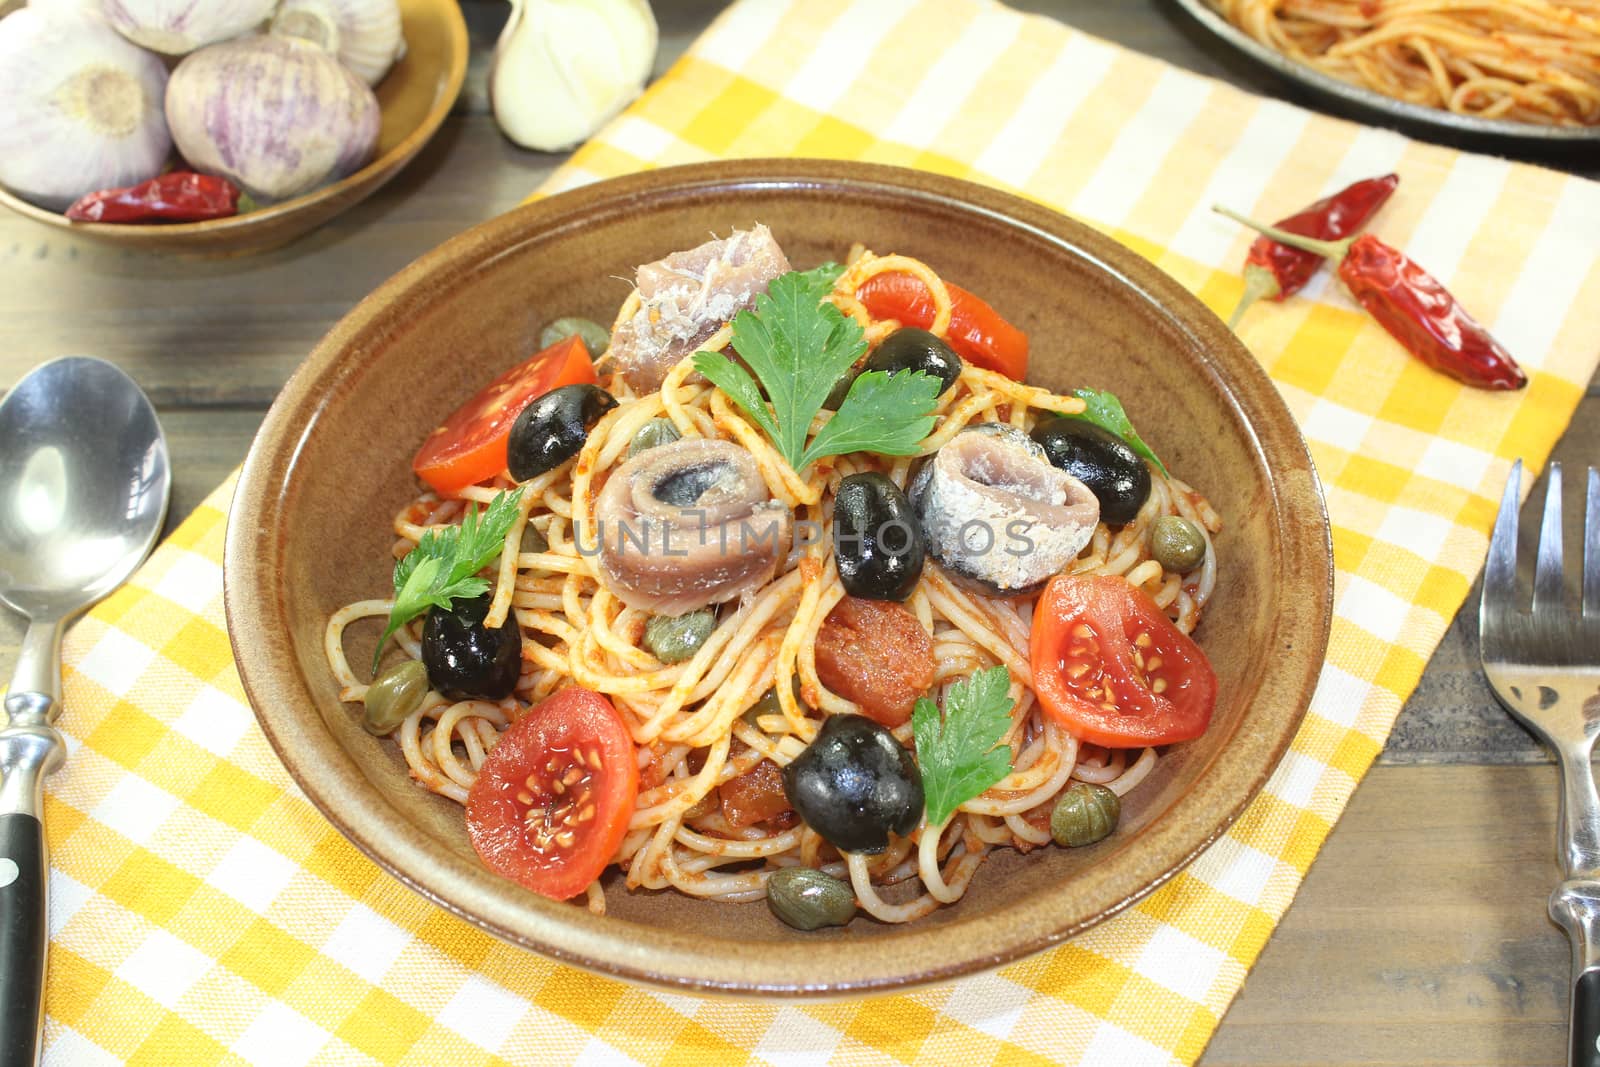 Spaghetti alla puttanesca with olives, capers and anchovies by discovery